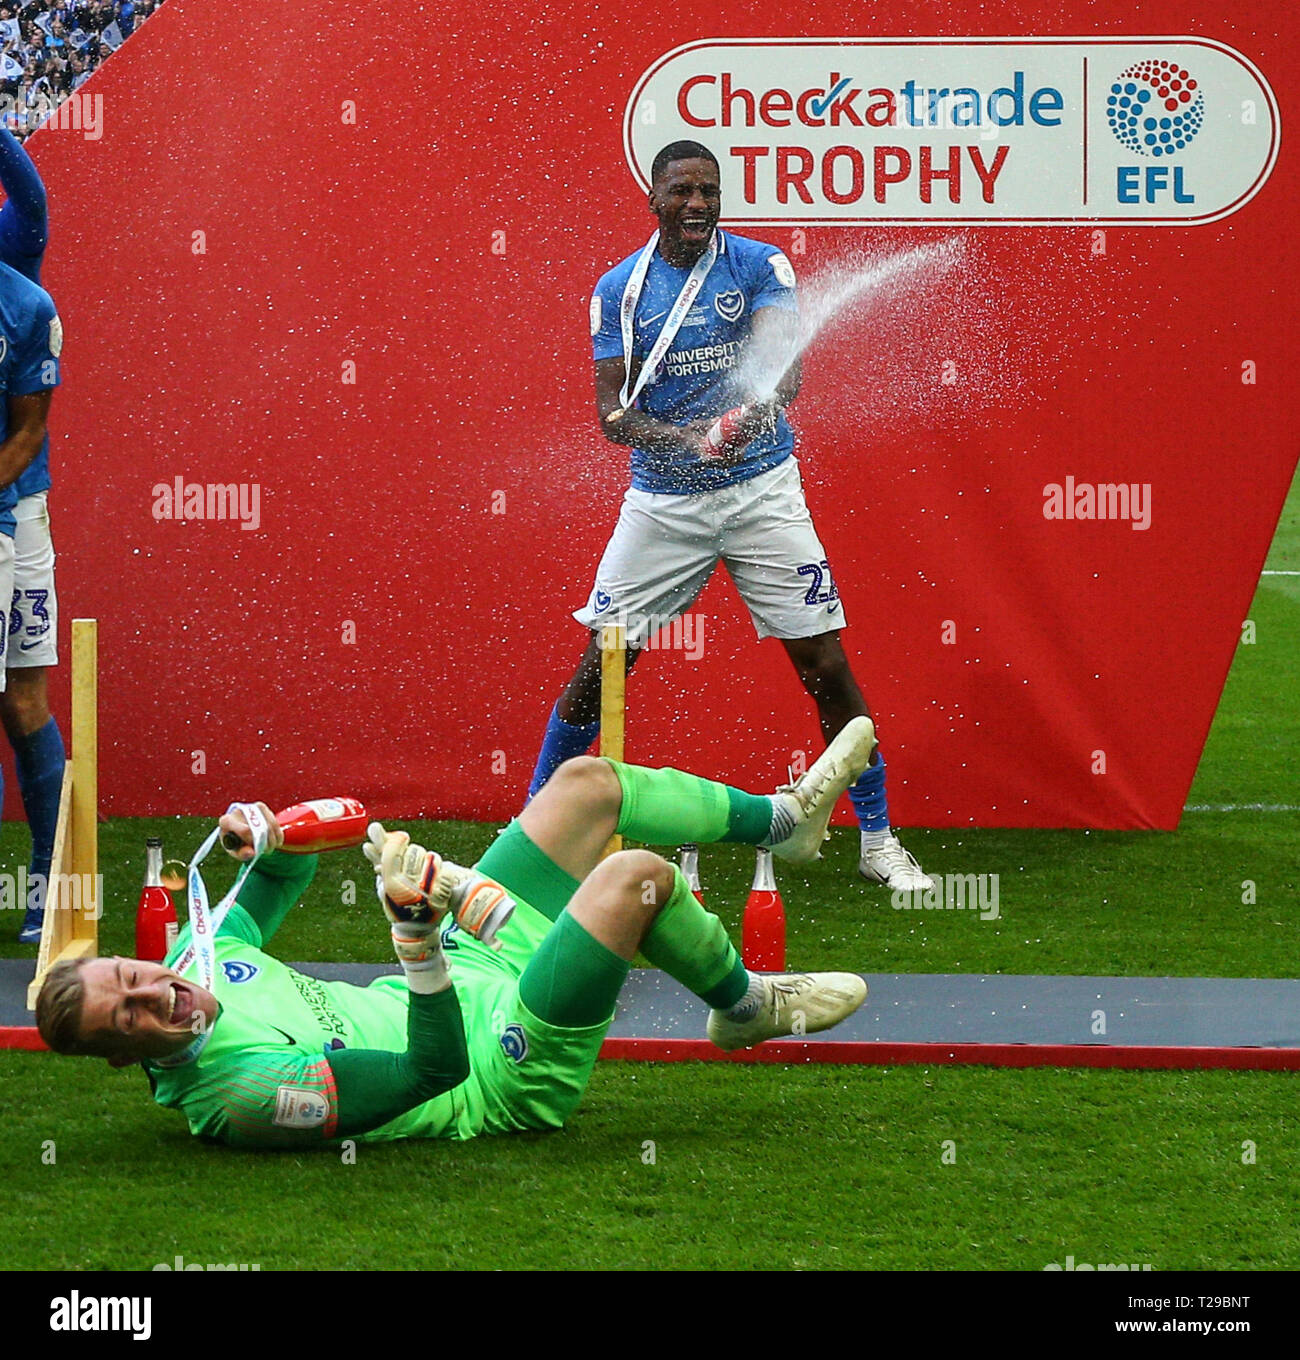 London, UK. 31st Mar, 2019. Checkatrade Trophy Final, Portsmouth versus Sunderland; Craig MacGillivray of Portsmouth takes a tumble after knocking the hoarding down with Omar Bogle of Portsmouth spraying champagne in celebration Credit: Action Plus Sports/Alamy Live News Stock Photo